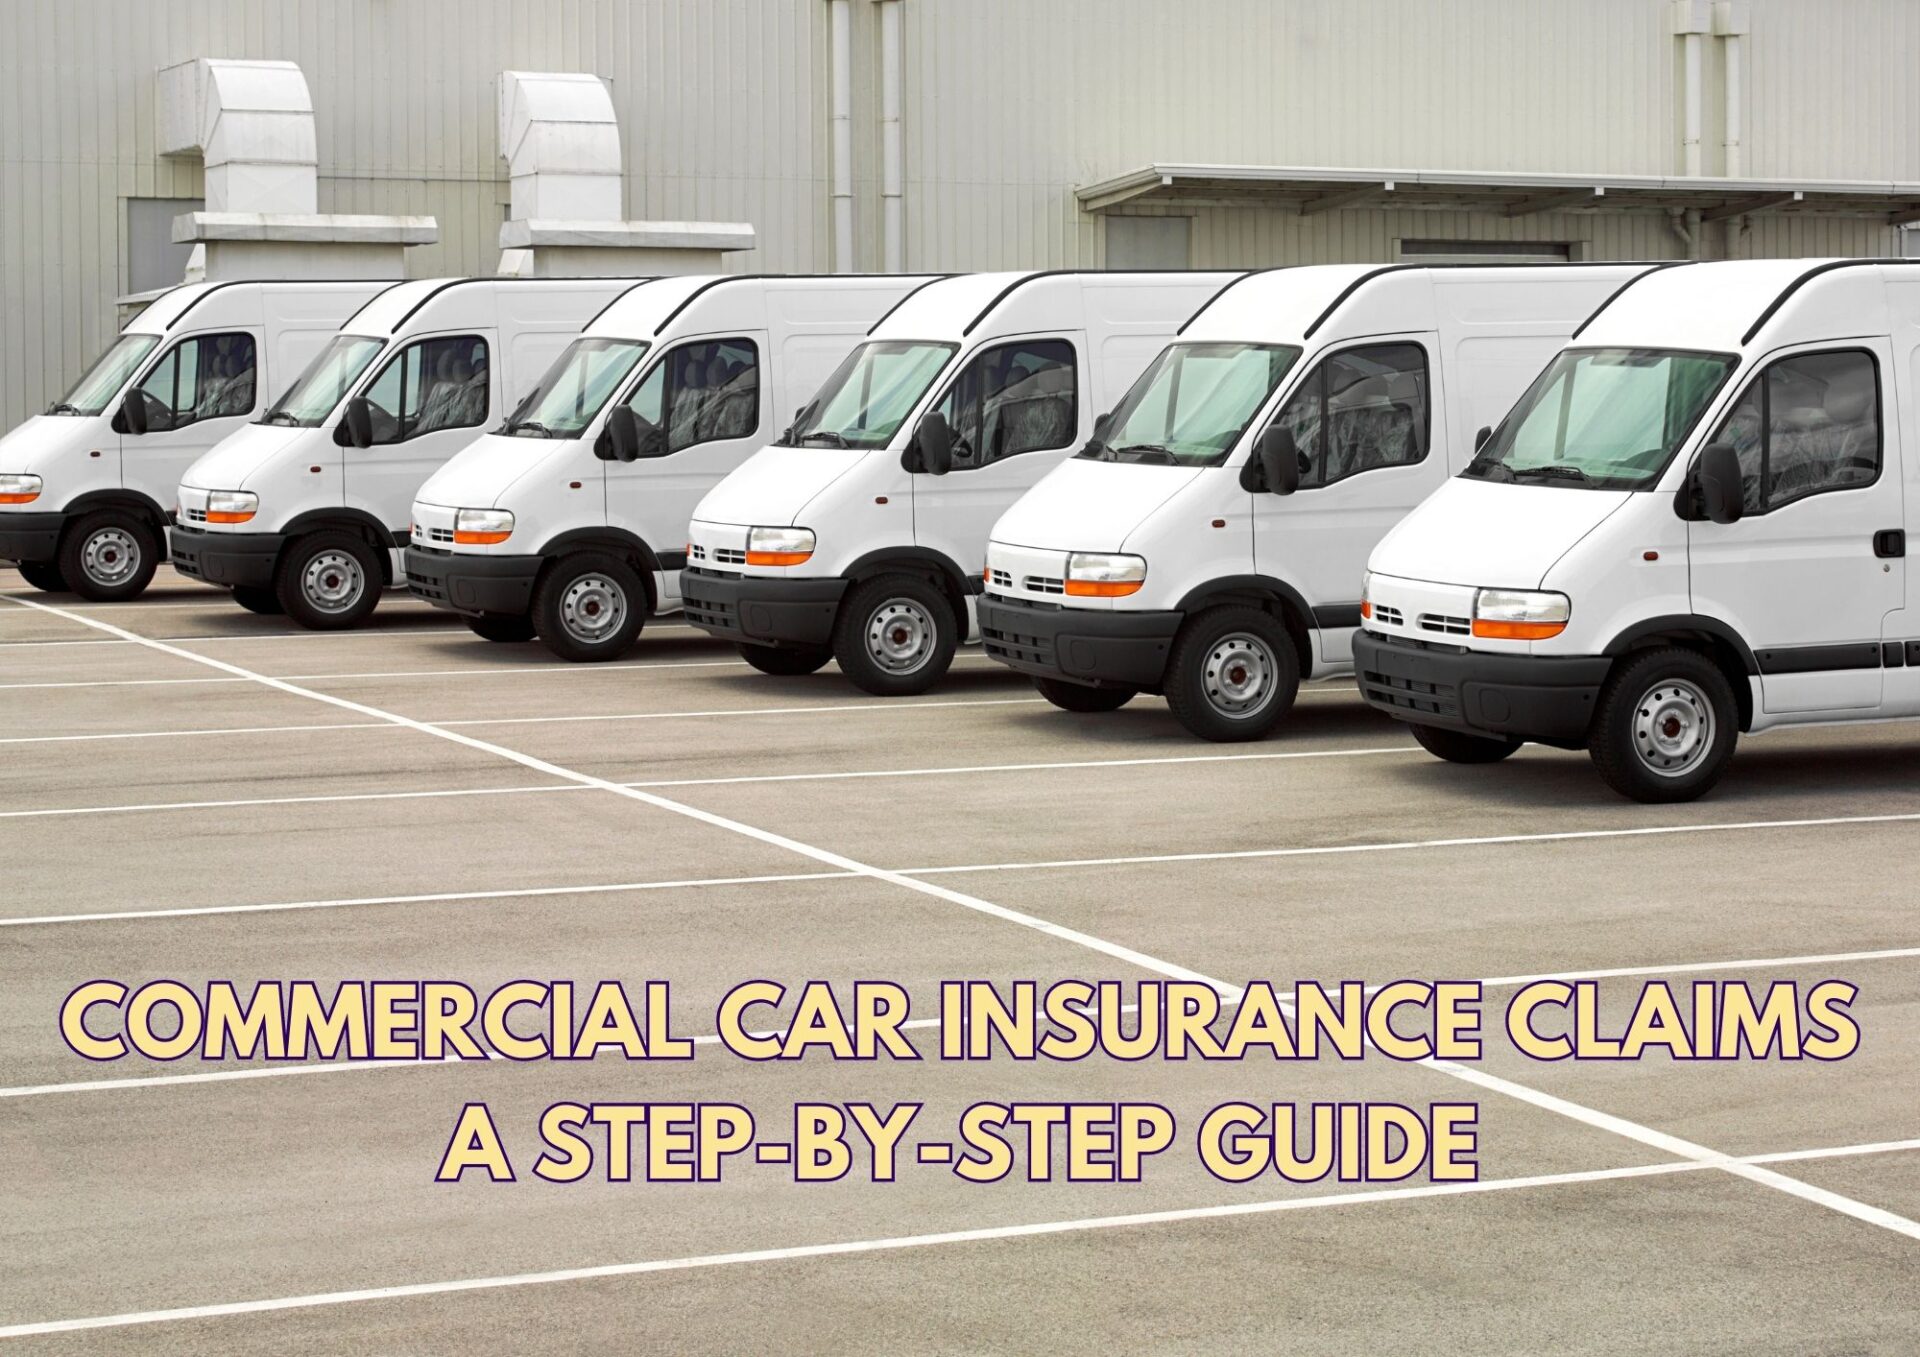 Commercial Car Insurance Claims-A Step-by-Step Guide